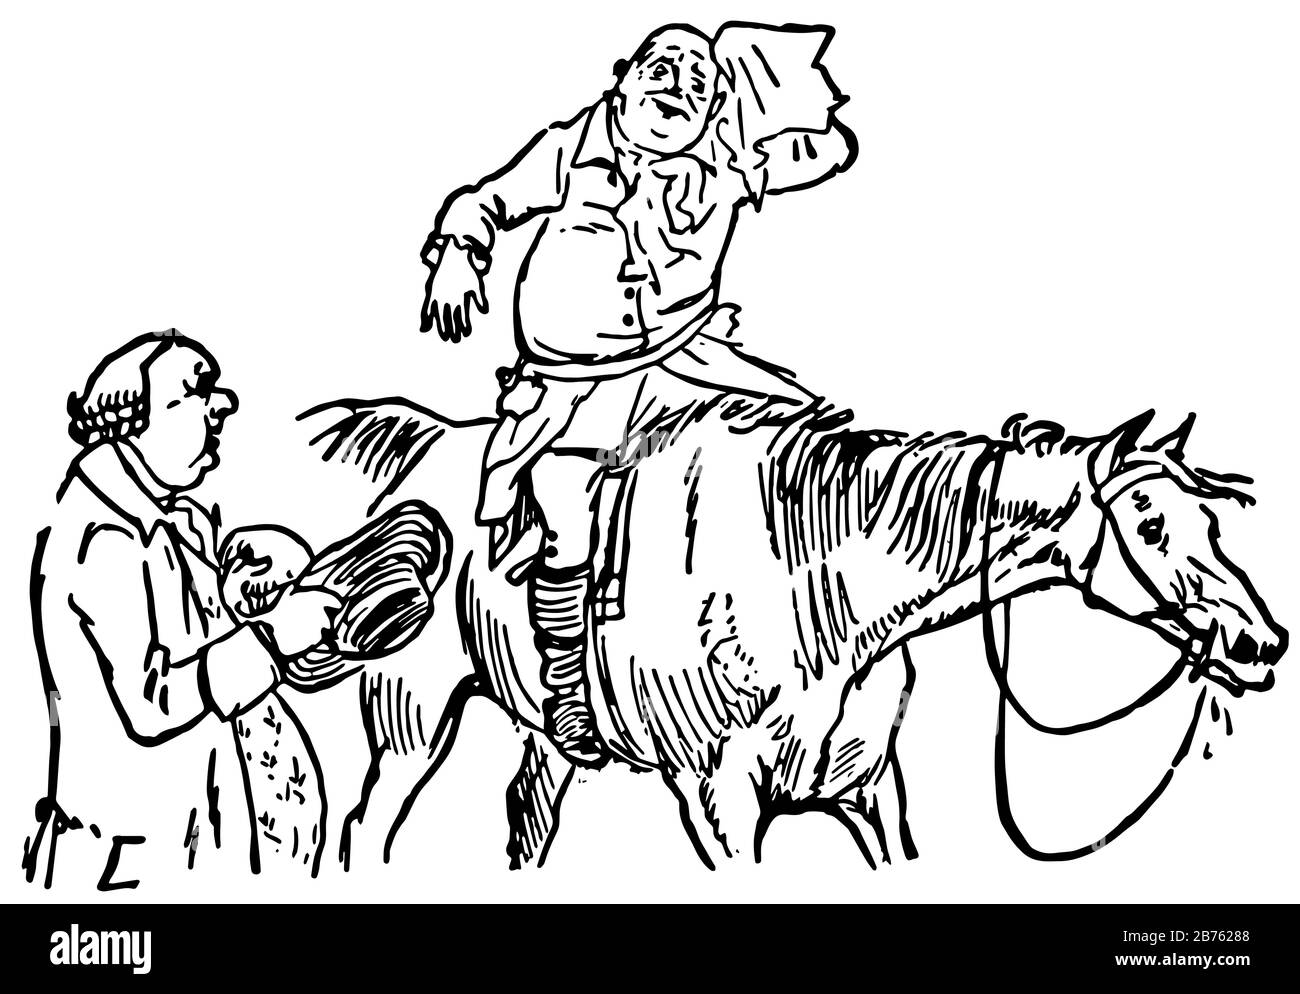 John Gilpin, this scene shows a man sitting on horse and wiping head, another man holding hat of him in hand standing near horse, vintage line drawing Stock Vector